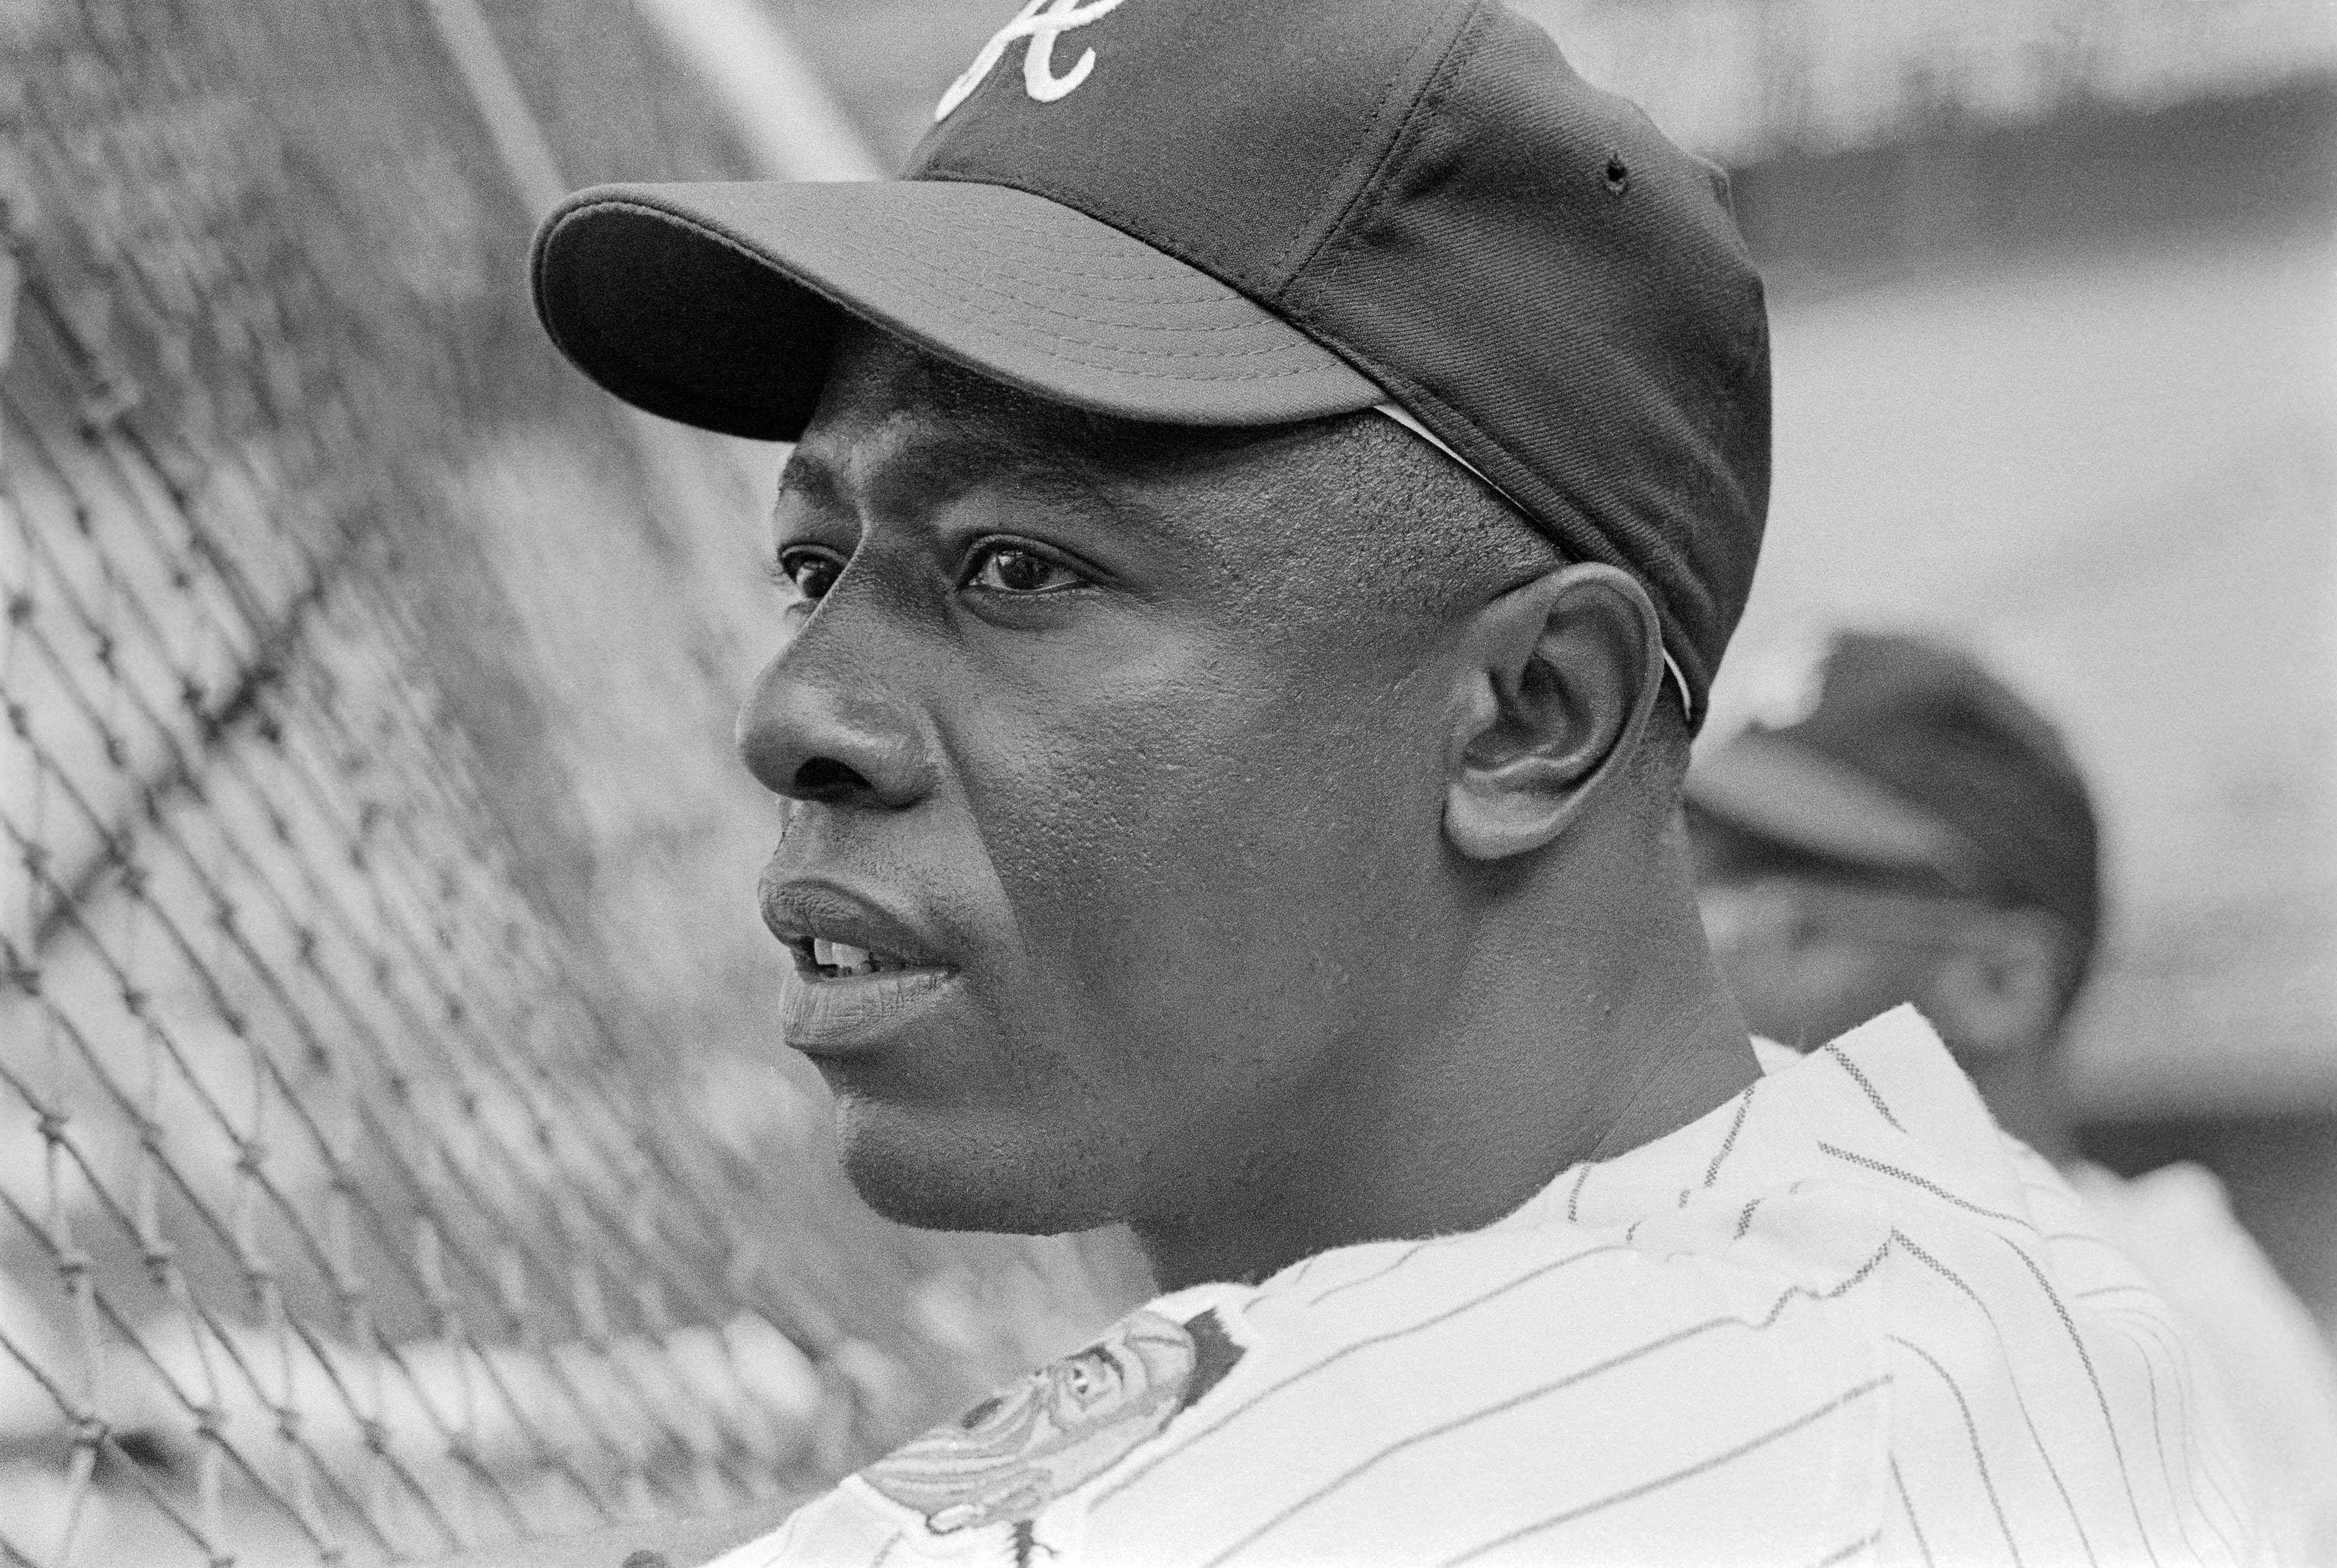 Outfielder Hank Aaron of the Milwaukee Braves looks on during batting  News Photo - Getty Images